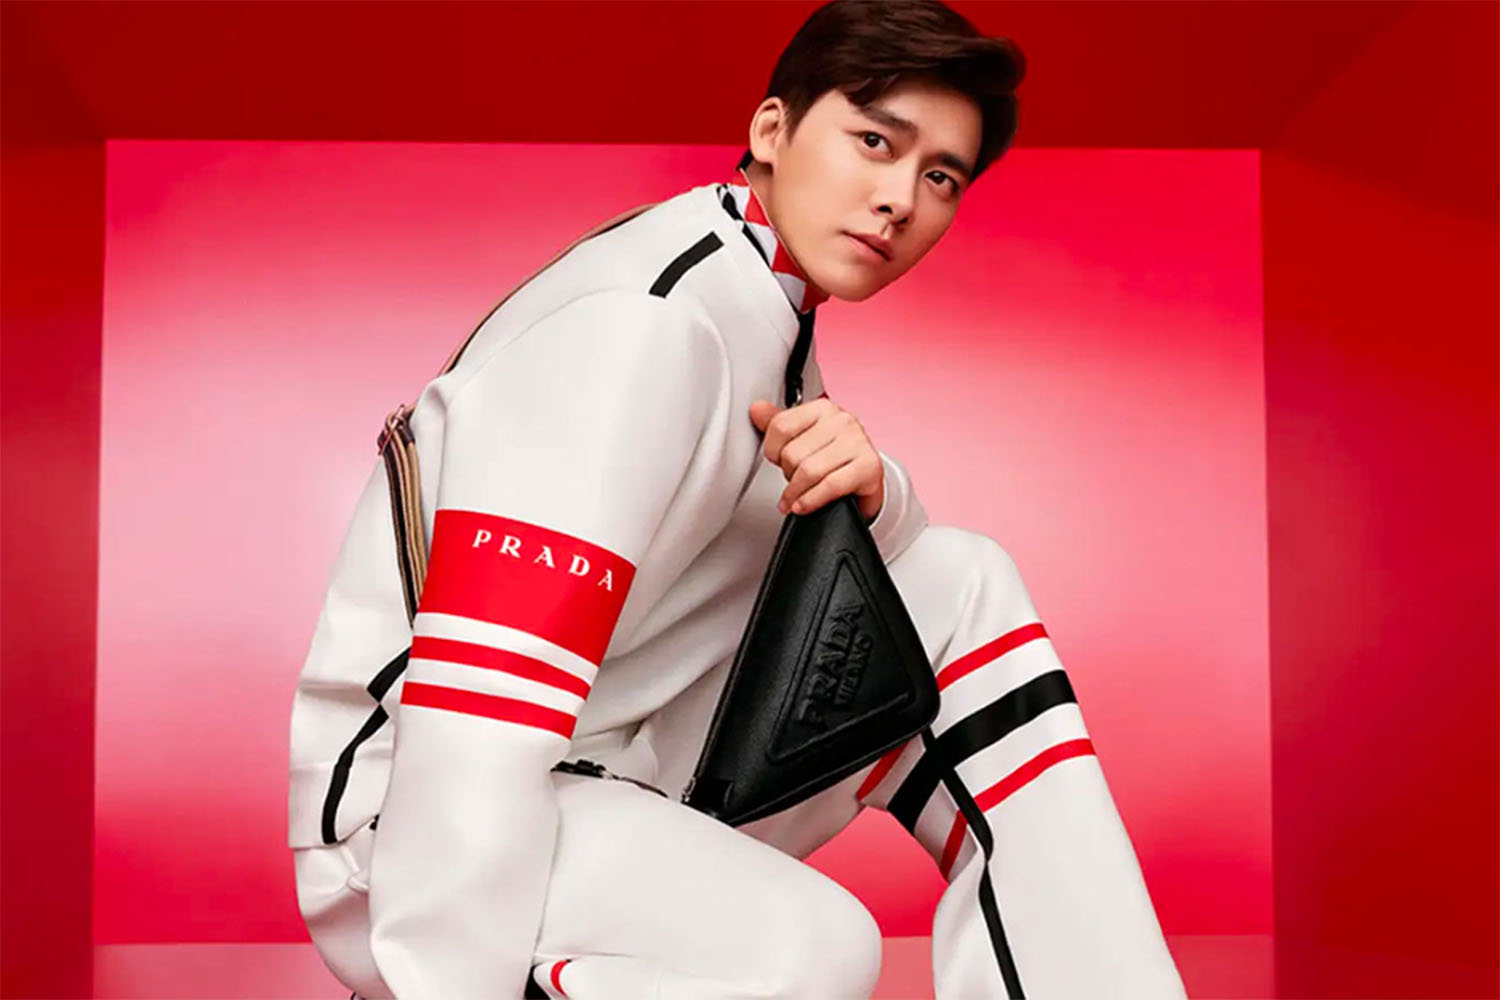 a model kneeling in white with a red striped outfit from Prada